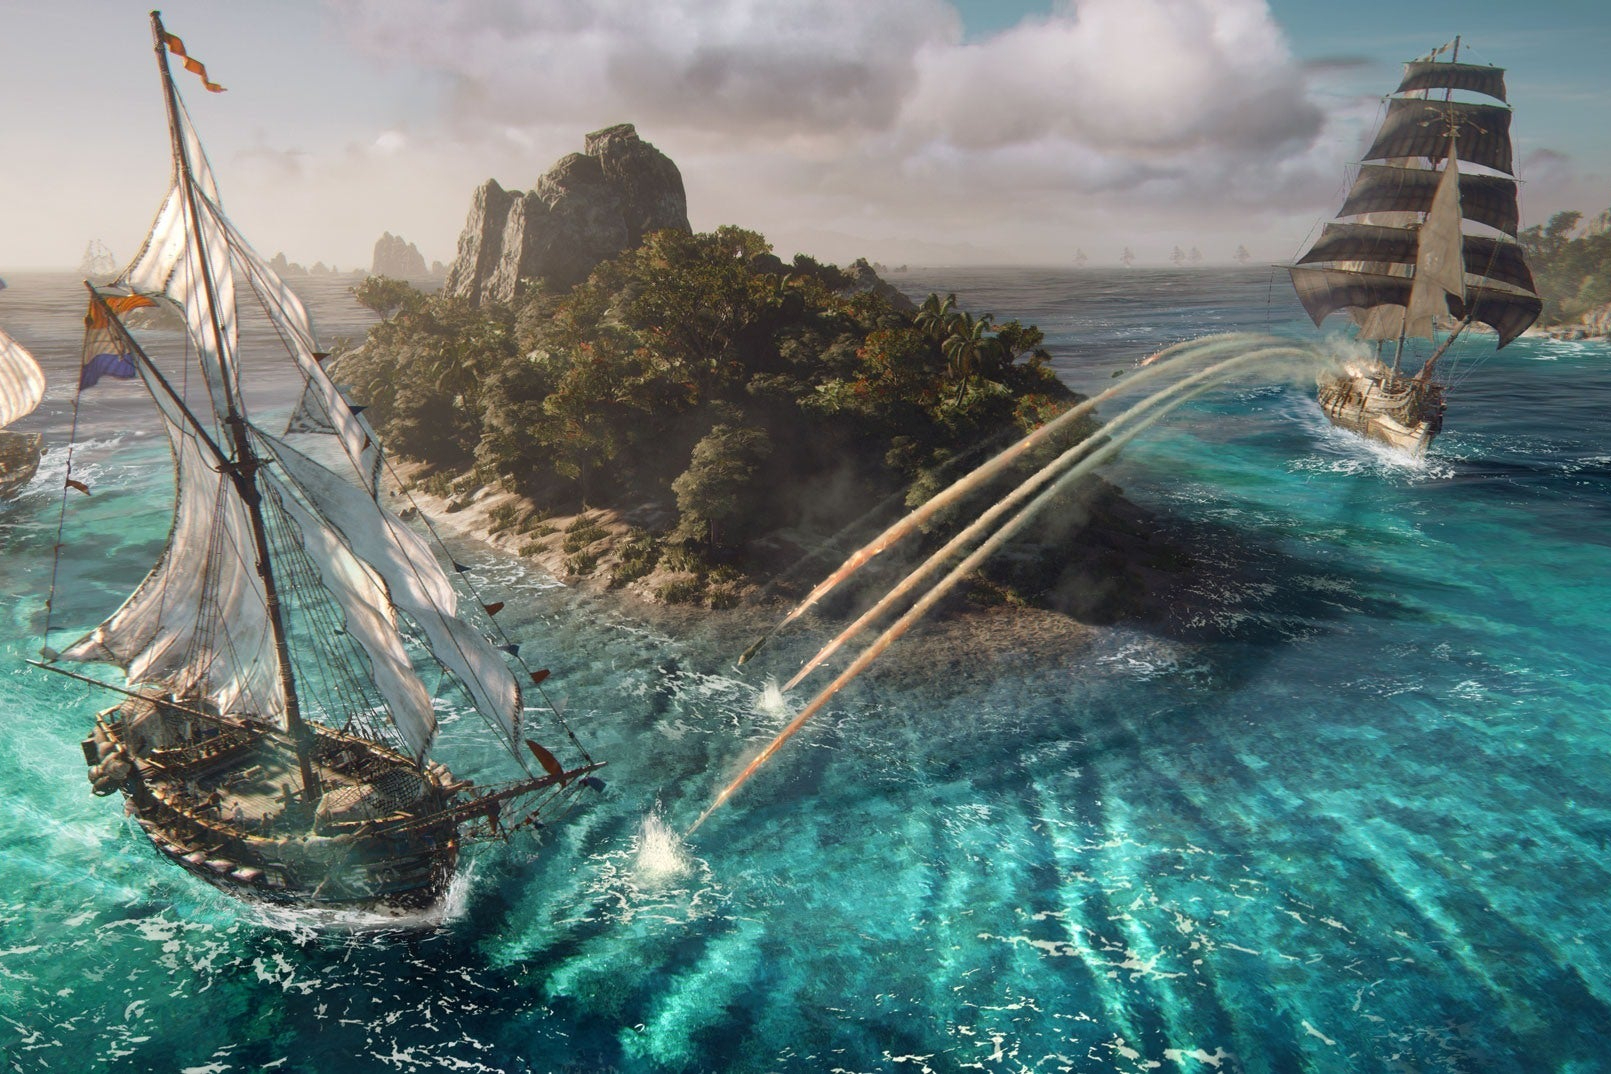 Skull and Bones Release Date: When is Skull and Bones Coming Out?